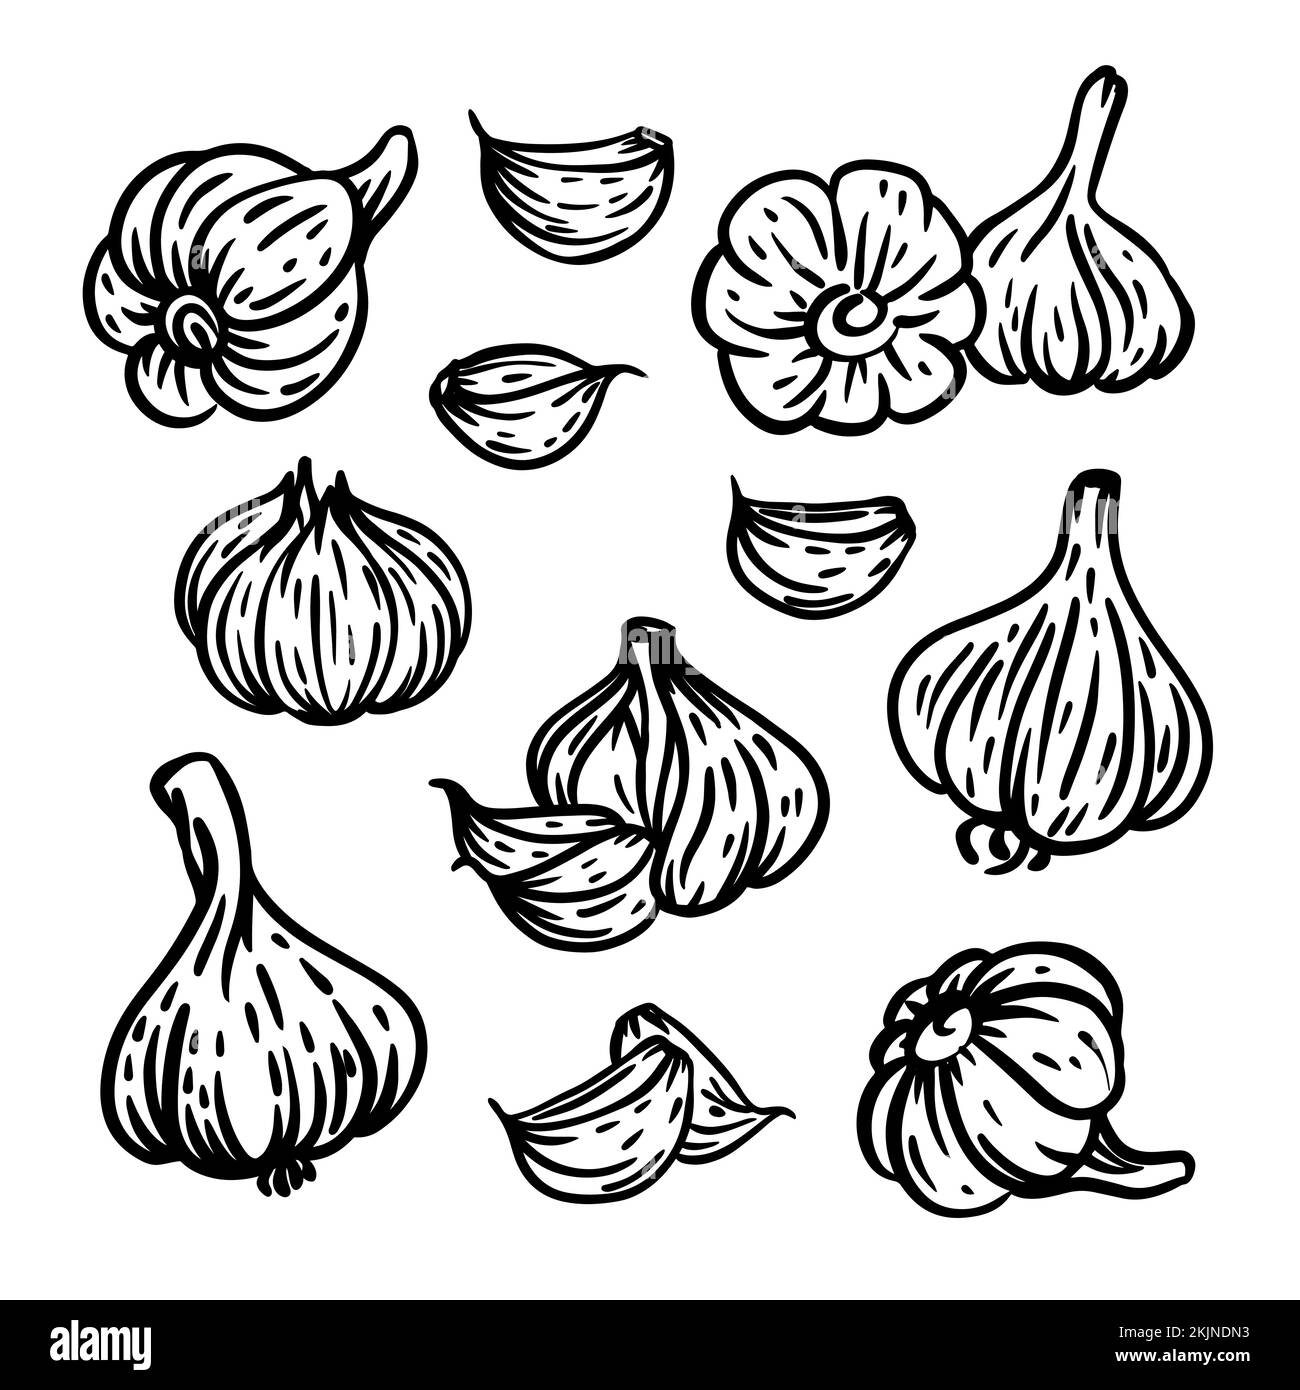 GARLIC Spicy Seasoning For Design Menu Of Restaurant Grocery Store And Food Market In Monochrome Sketch Style Hand Drawn Clip Art Vector Illustration Stock Vector